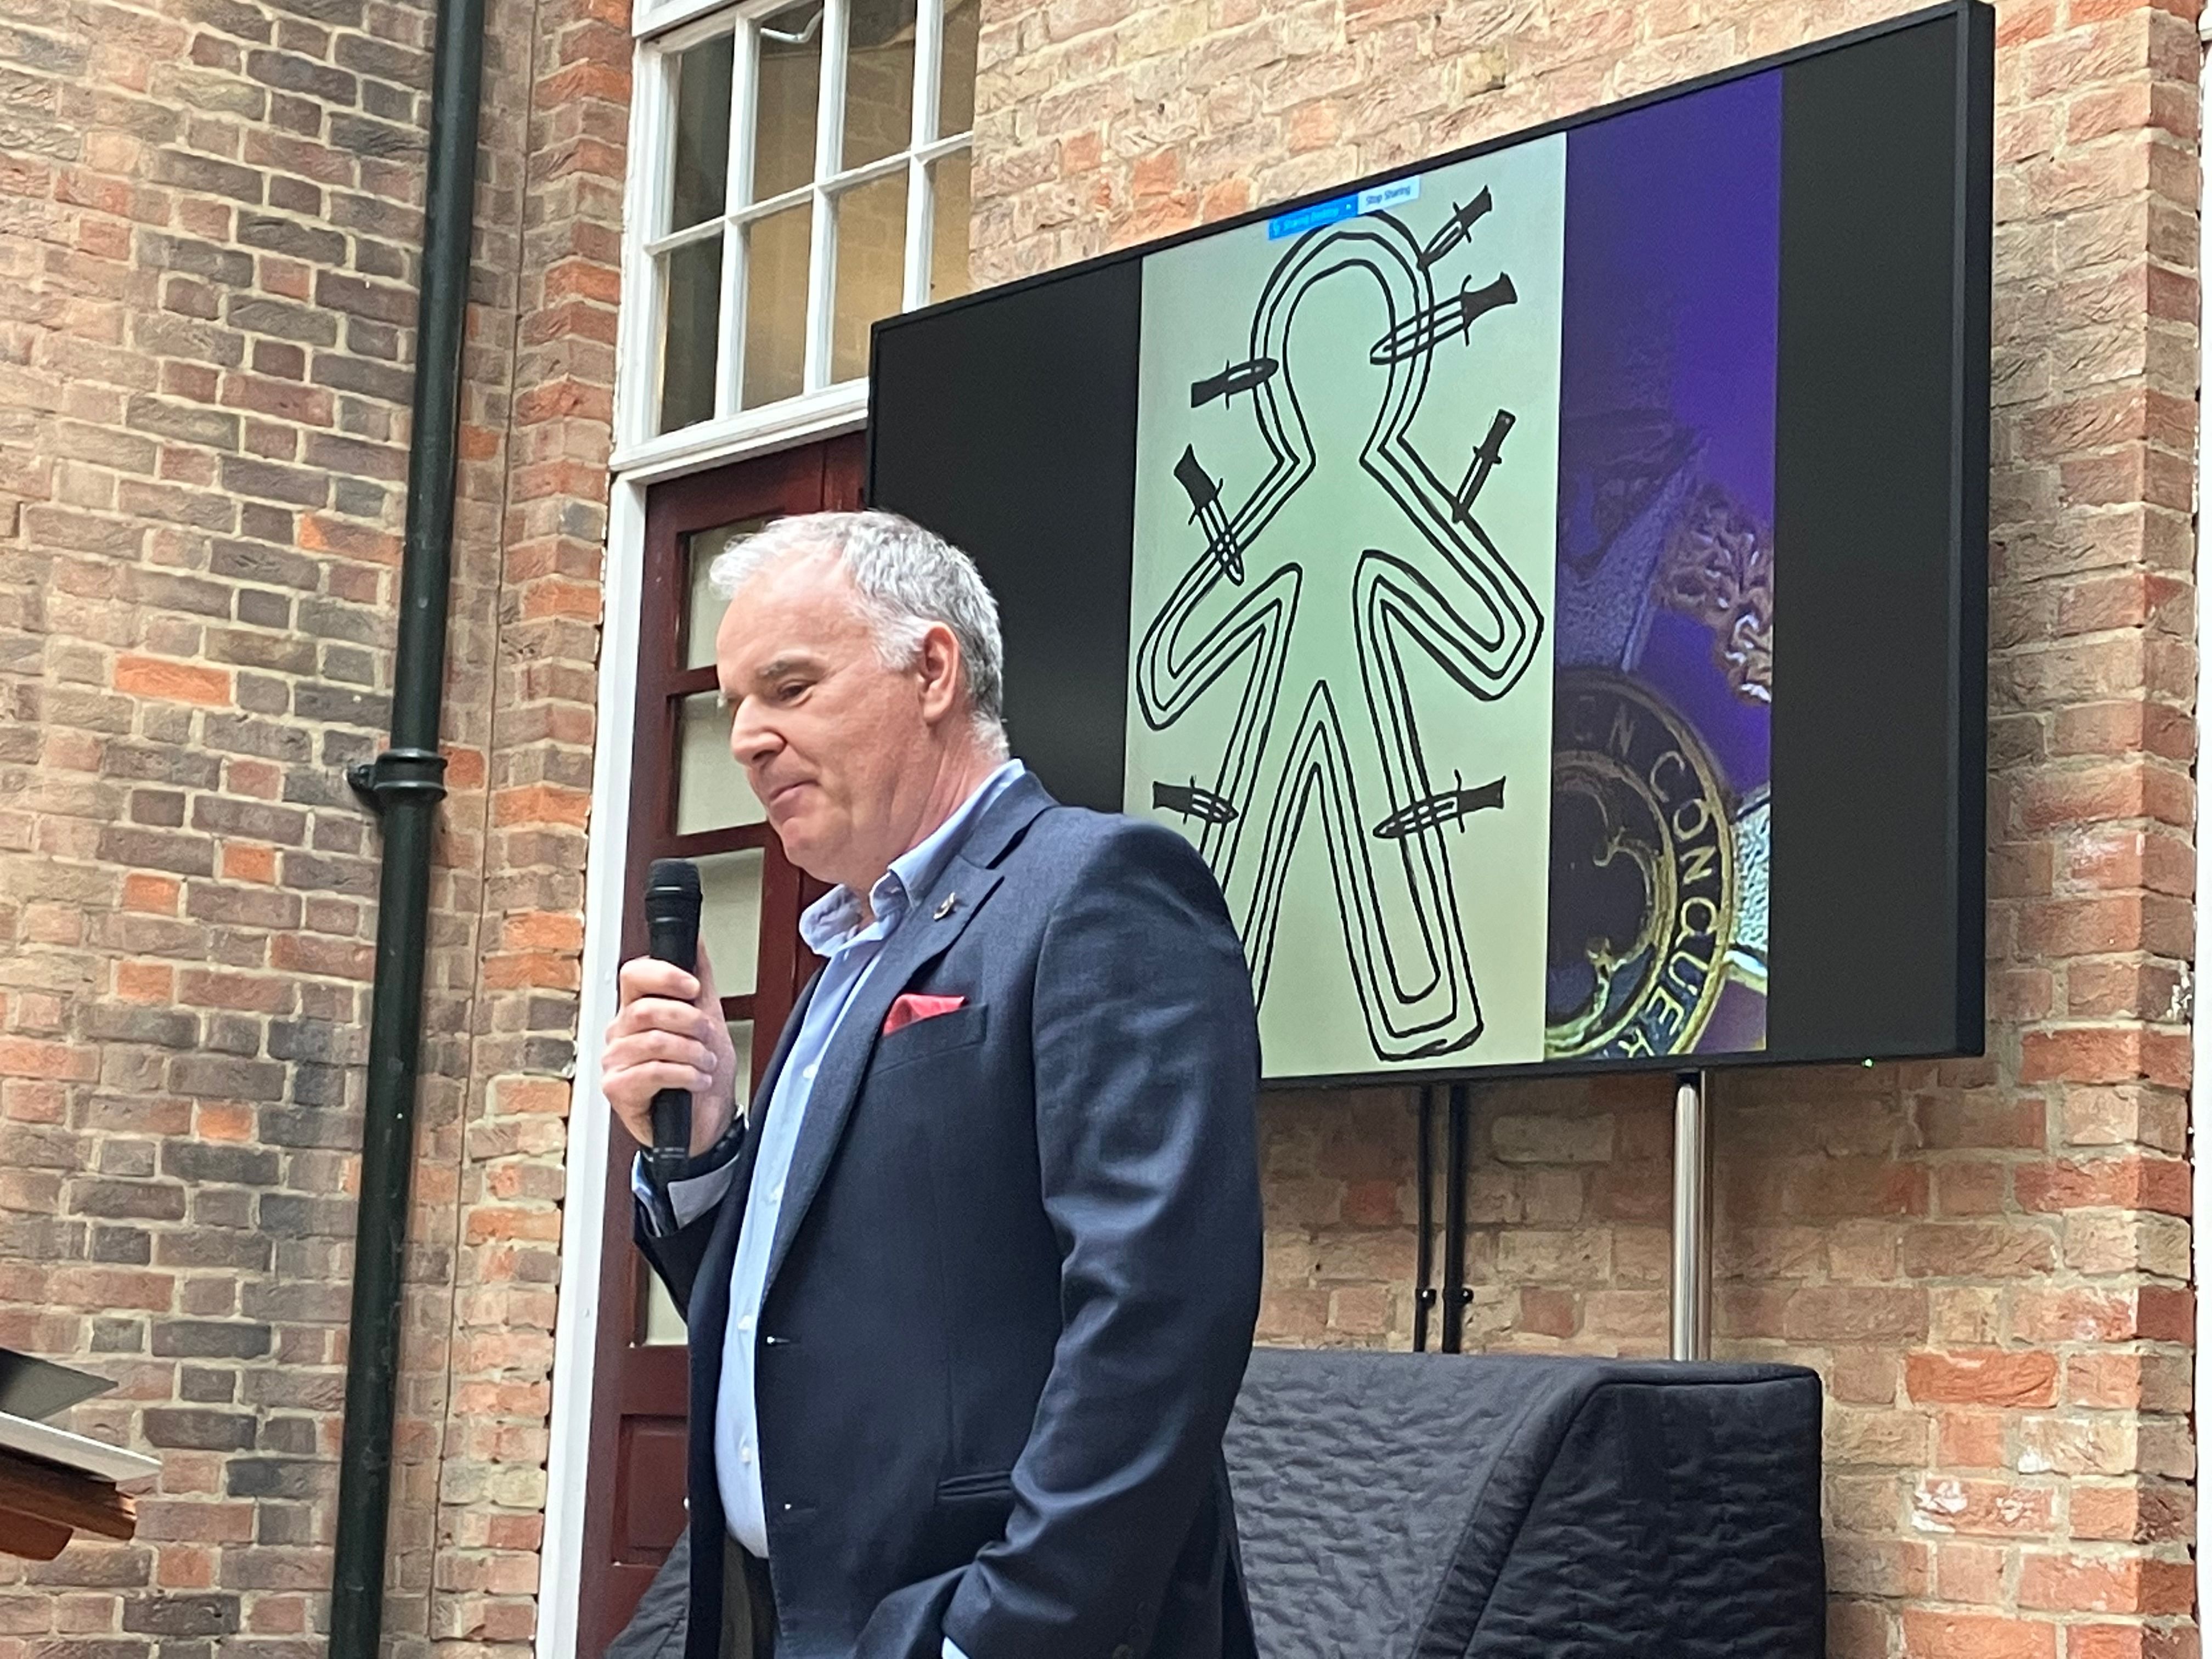 A man speaking in front of a slide showing a line drawing of a person with knives sticking into them